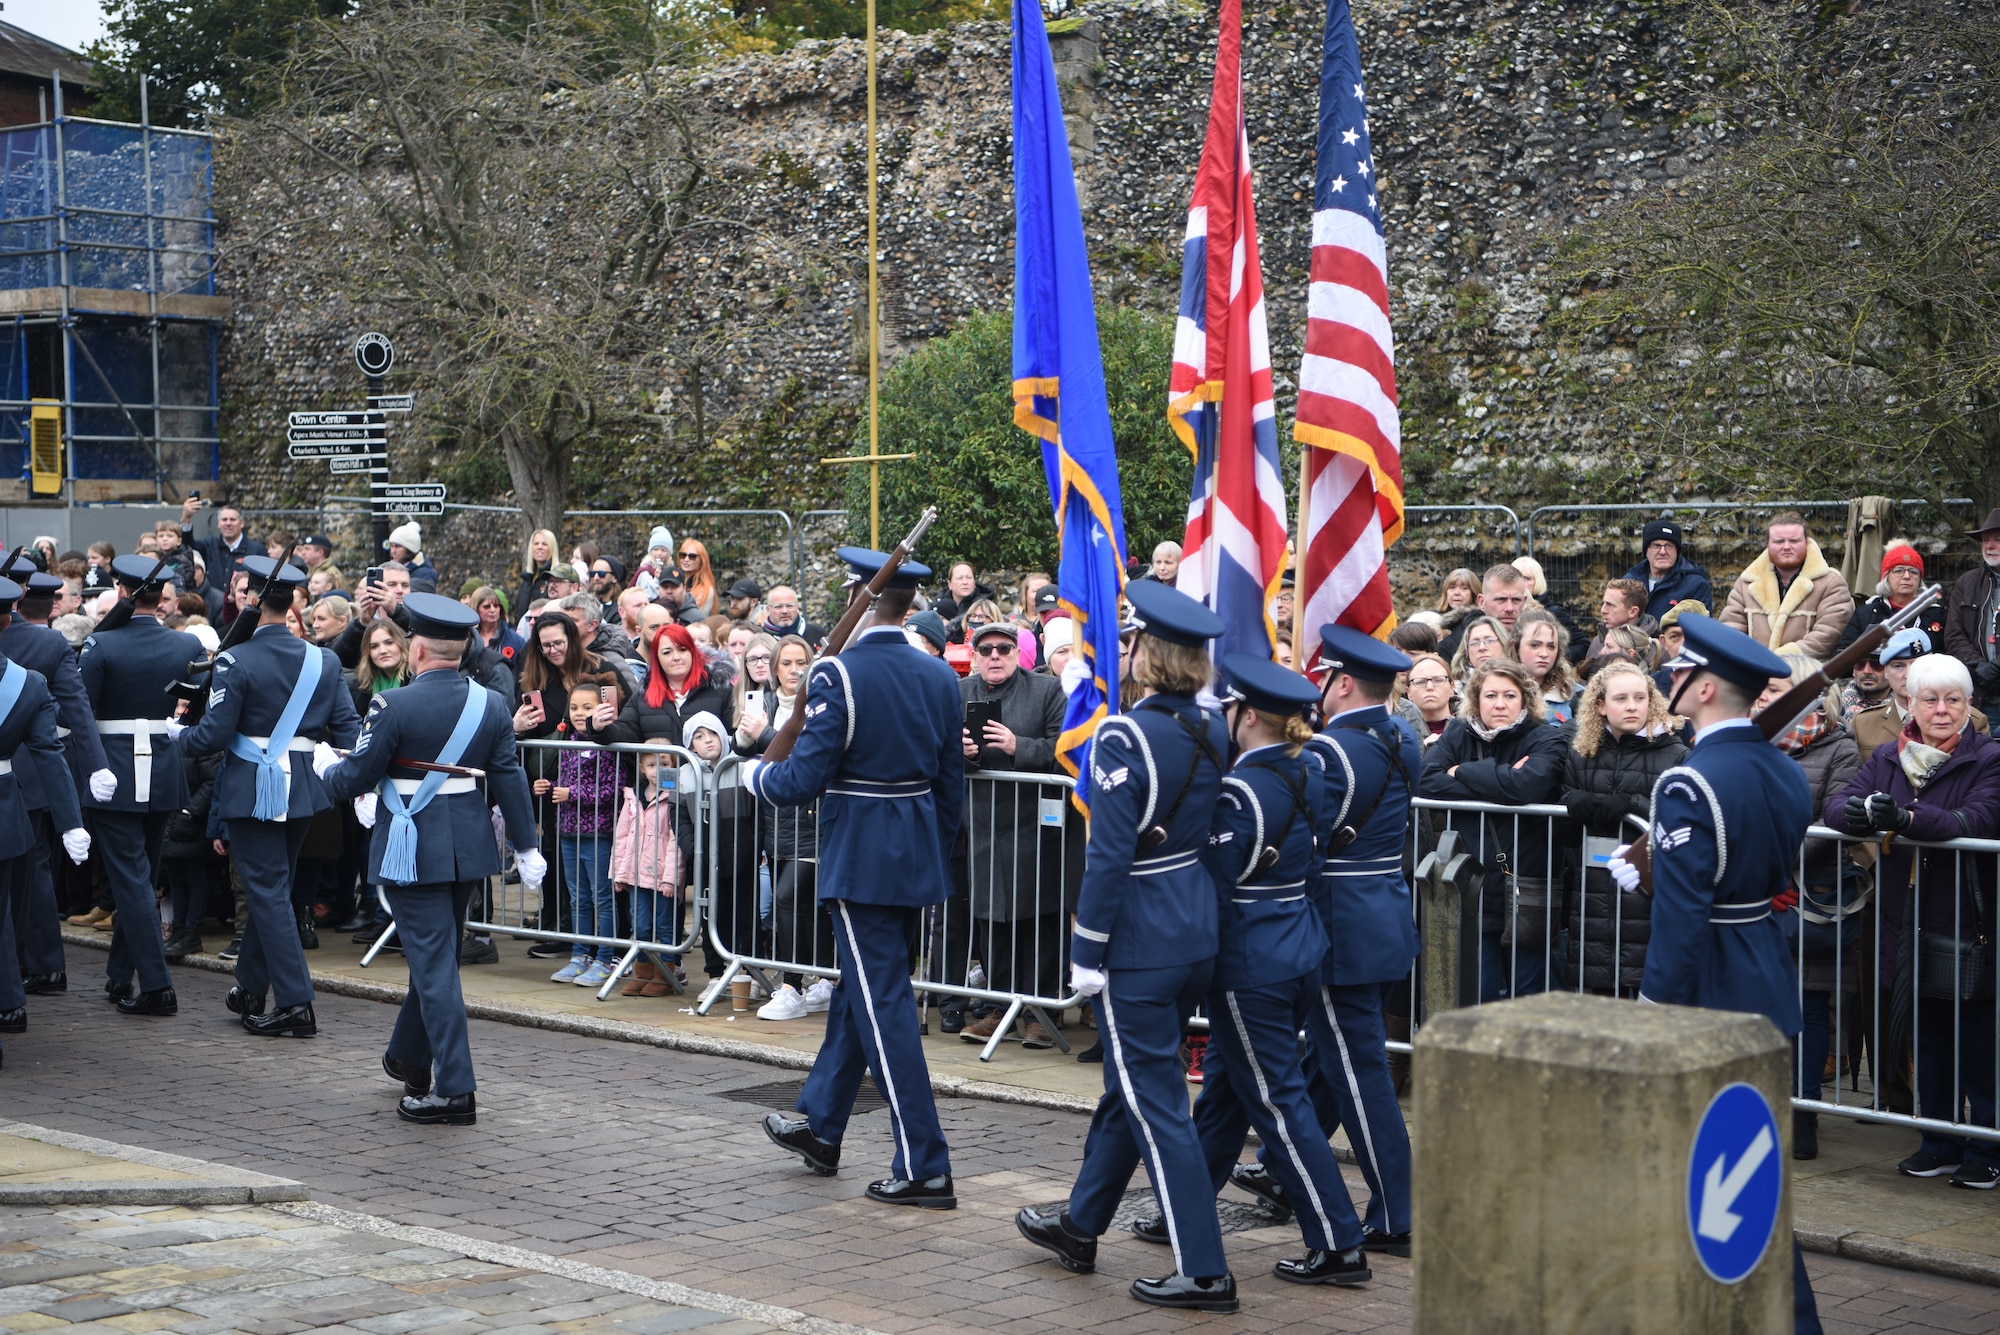 The U.S. Air Force Honor Guard marched in formation during a remembrance ceremony parade at Bury St. Edmunds, England, November 12, 2023.